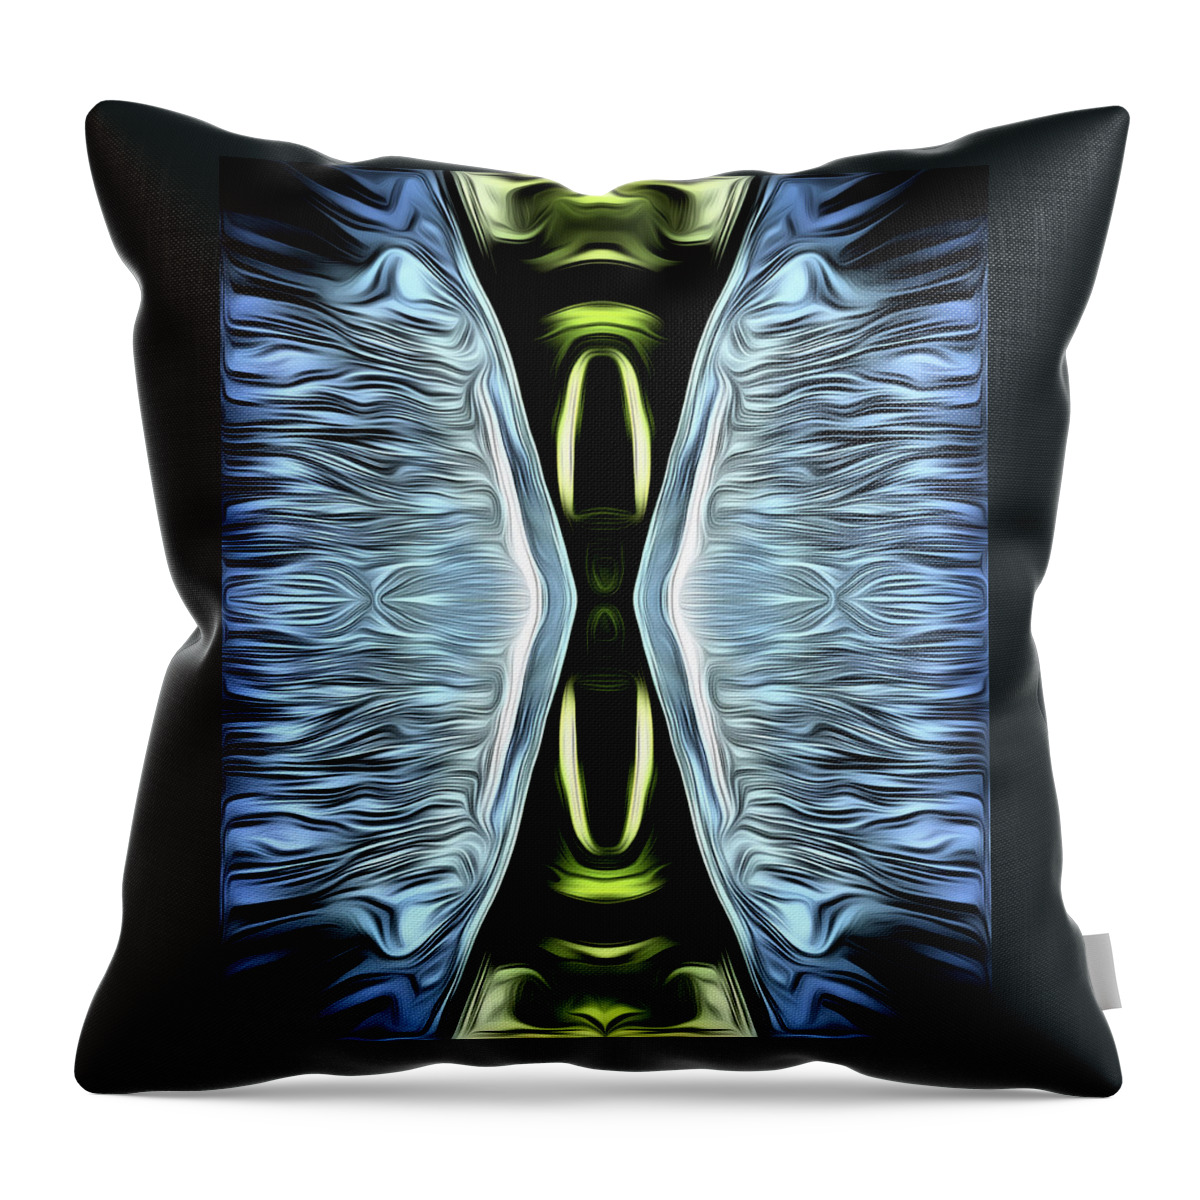 Abstract Art Throw Pillow featuring the digital art Hourglass Abstract by Ronald Mills